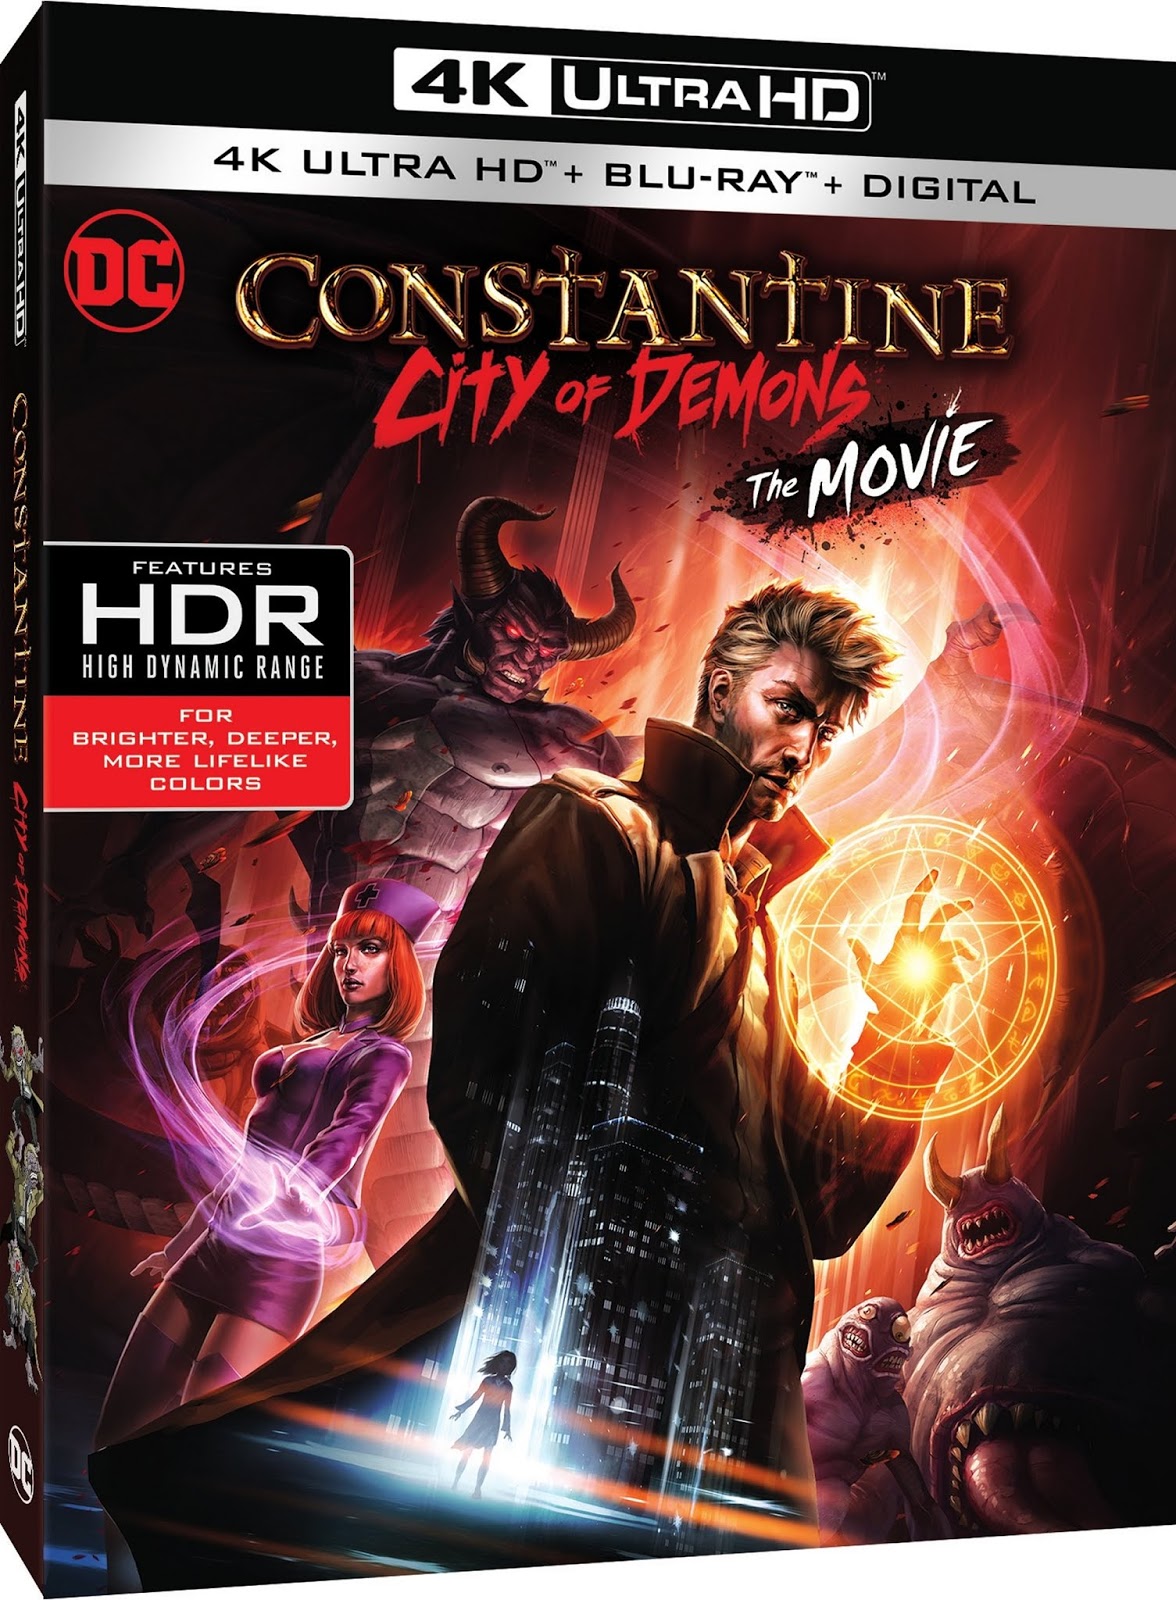 Idle Hands: Constantine: City of Demons Movie Coming 10/9/18